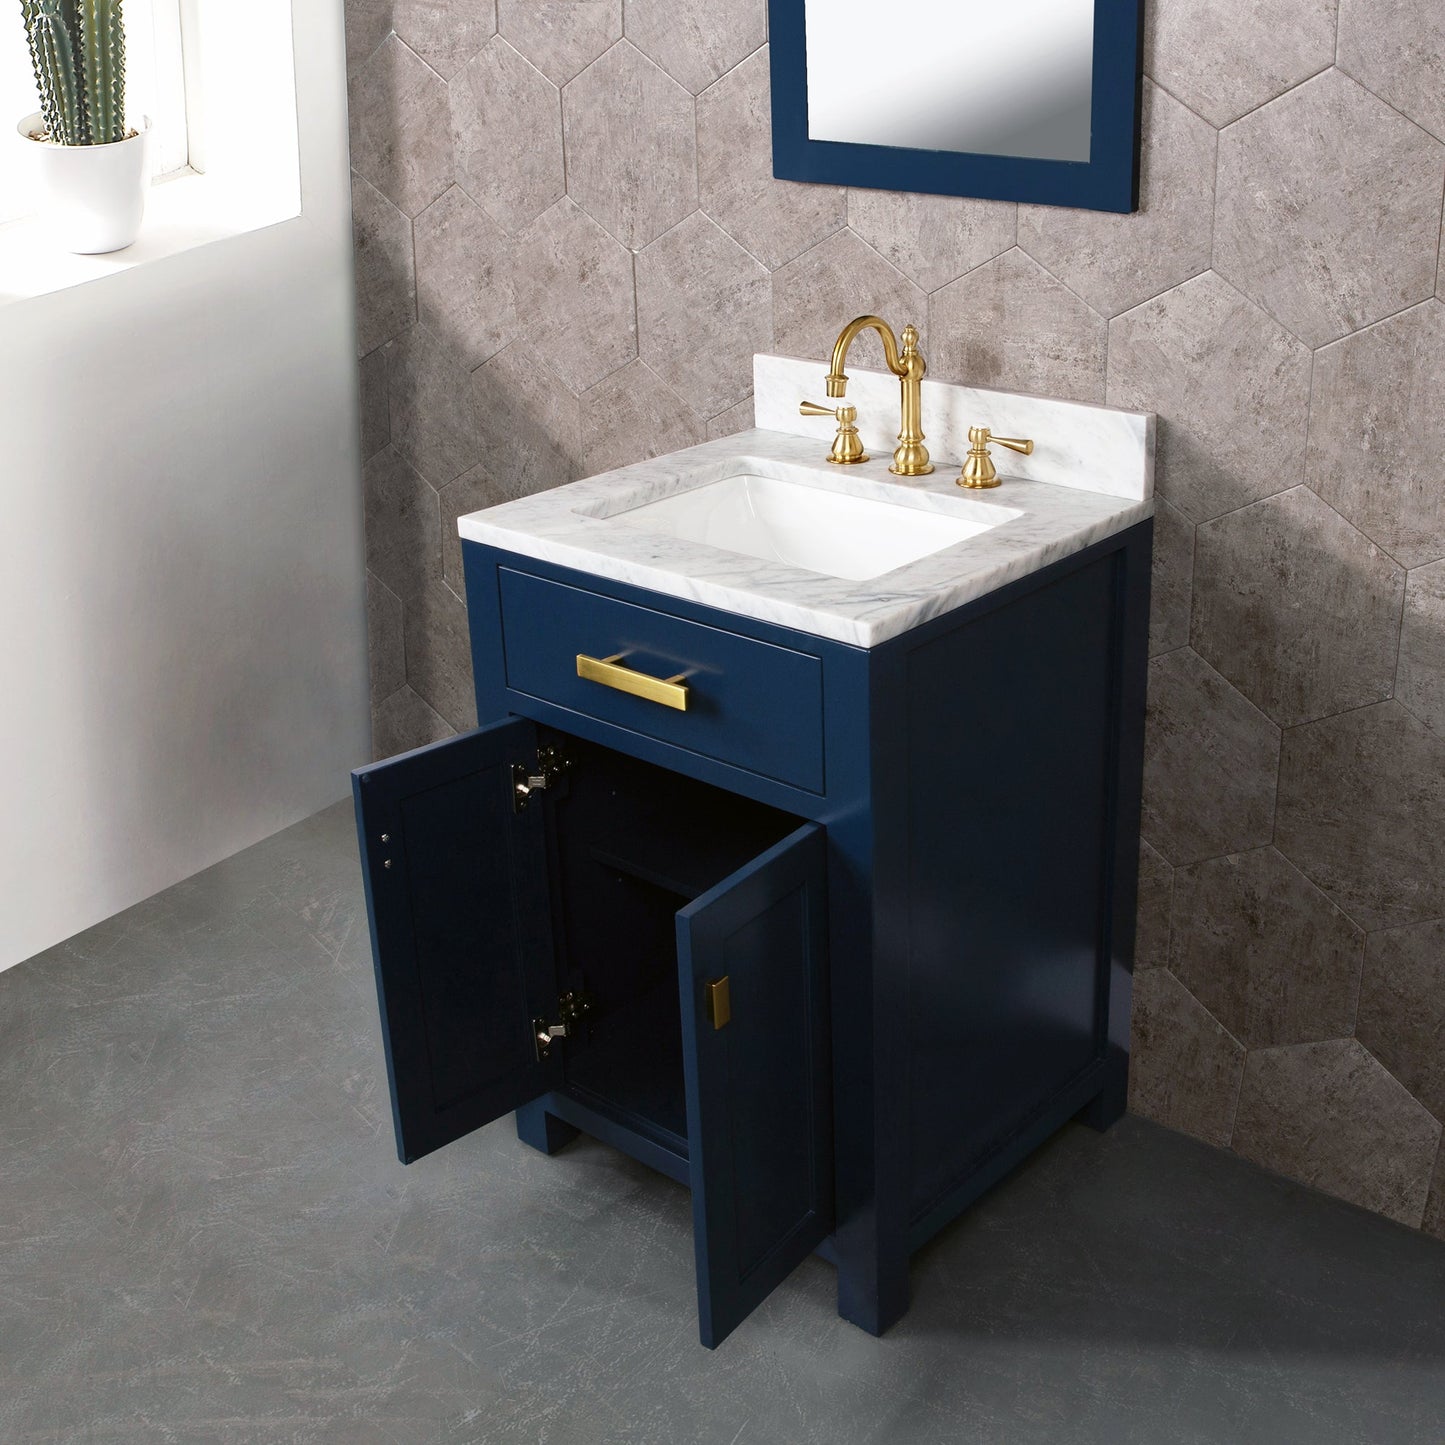 Madison 24-Inch Single Sink Carrara White Marble Vanity In Monarch Blue With Matching Mirror and F2-0012-06-TL Lavatory Faucet